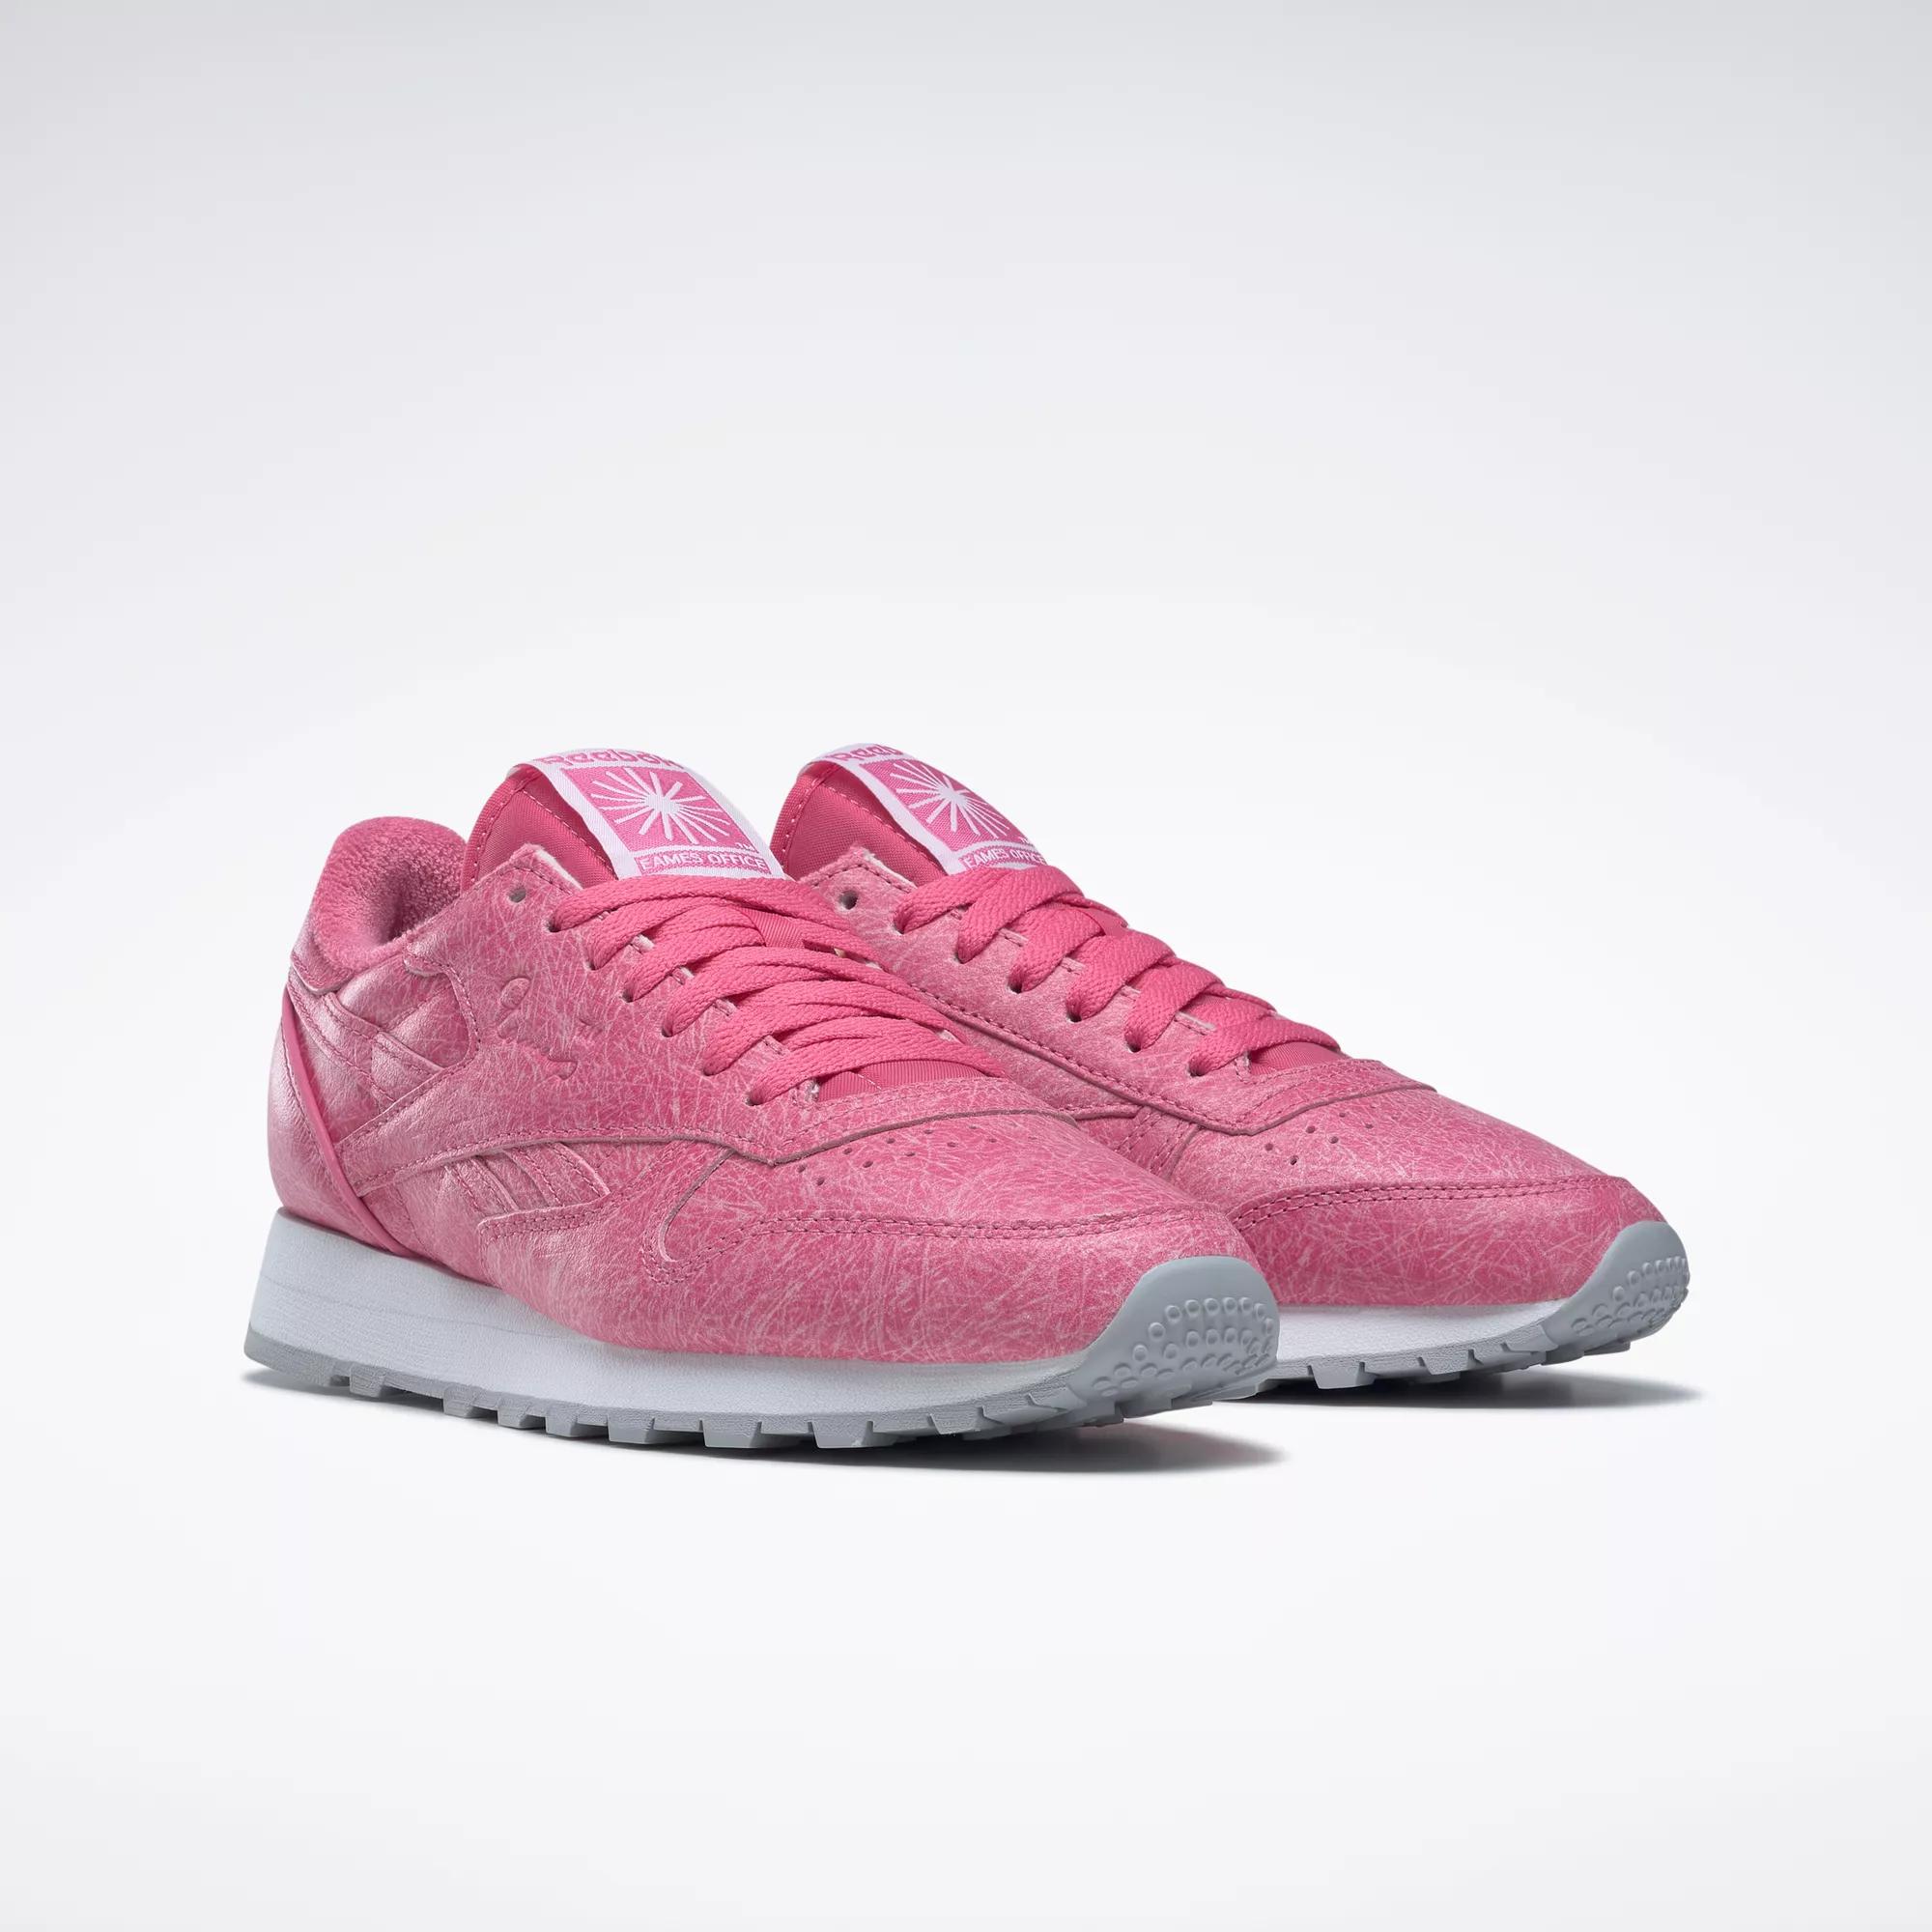 Eames Classic Leather Shoes - Astro Pink / Ftwr / Cold Grey 2 | Reebok